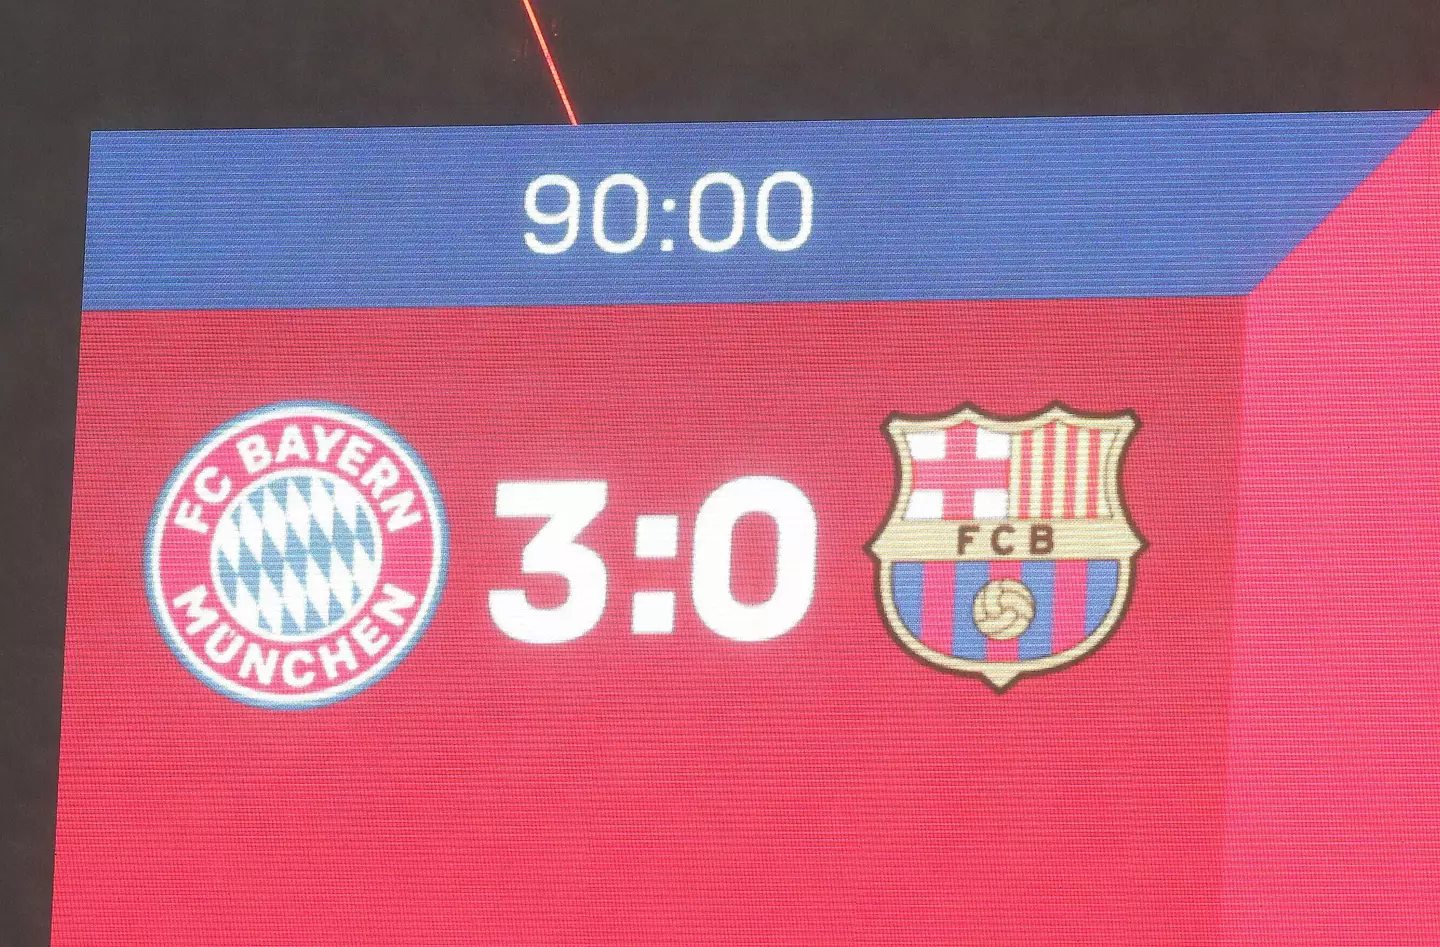 The scoreboard confirms Barcelona's defeat. Image: PA Images